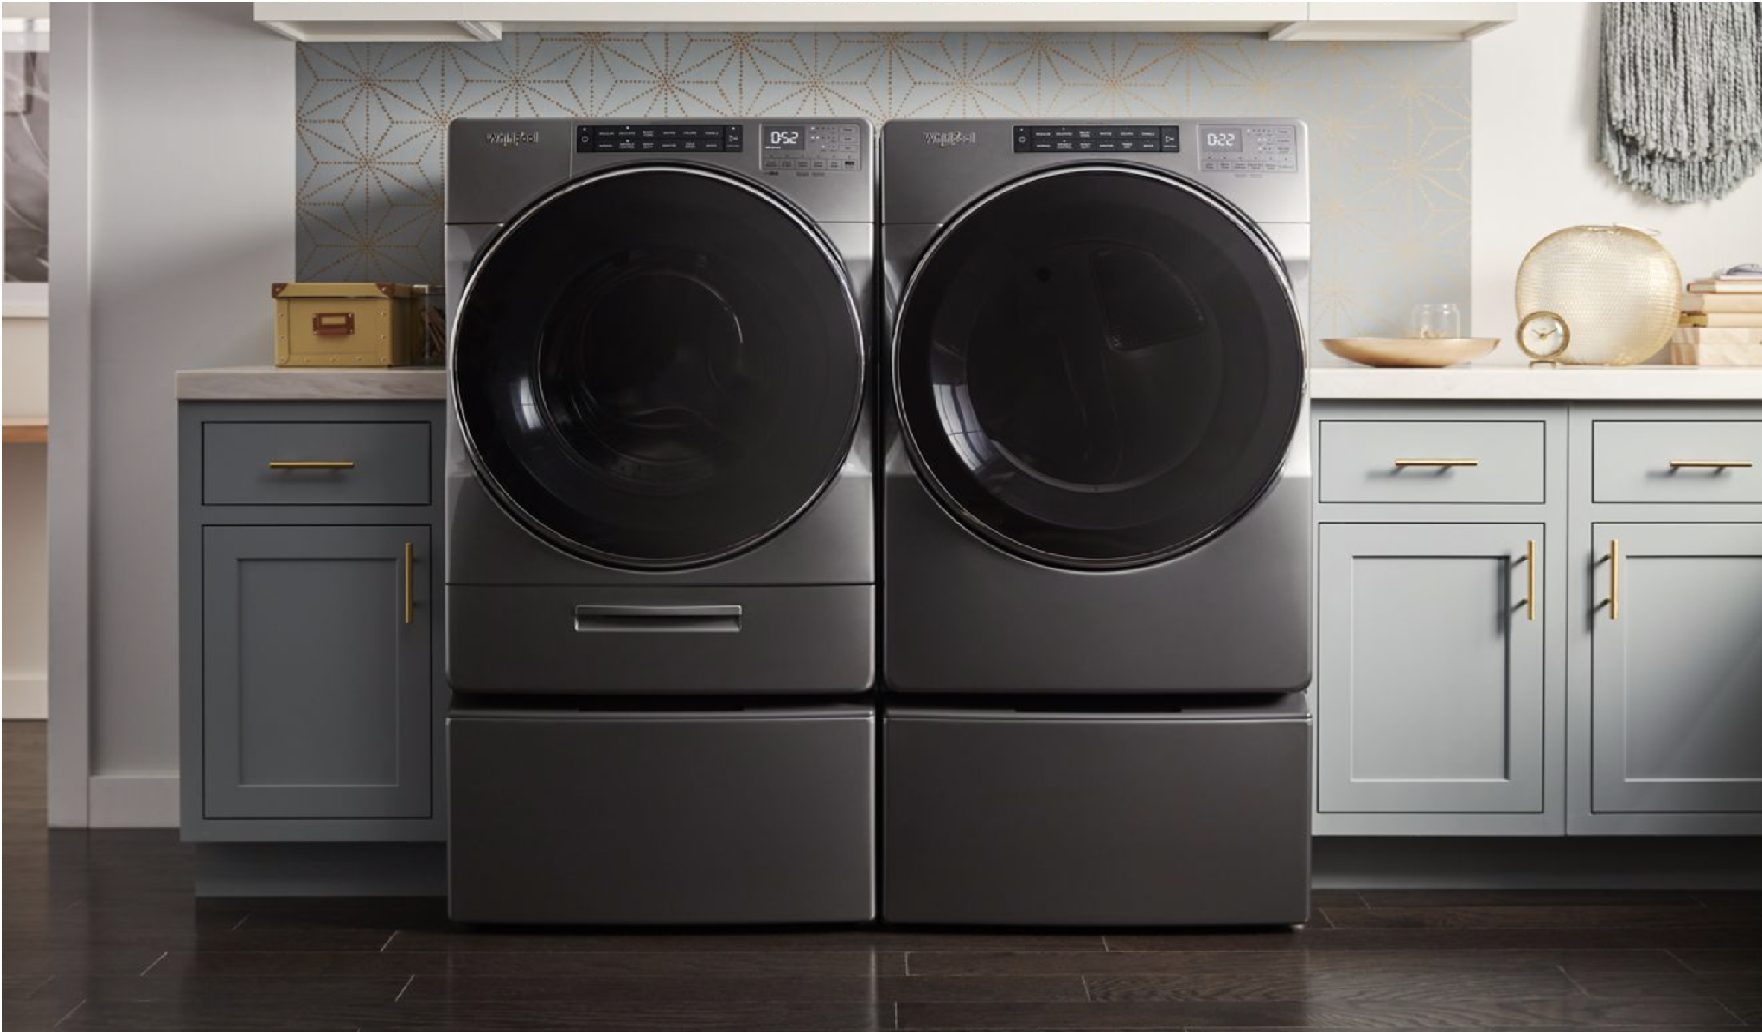 Image of side-by-side Whirlpool laundry pair with pedestal drawers